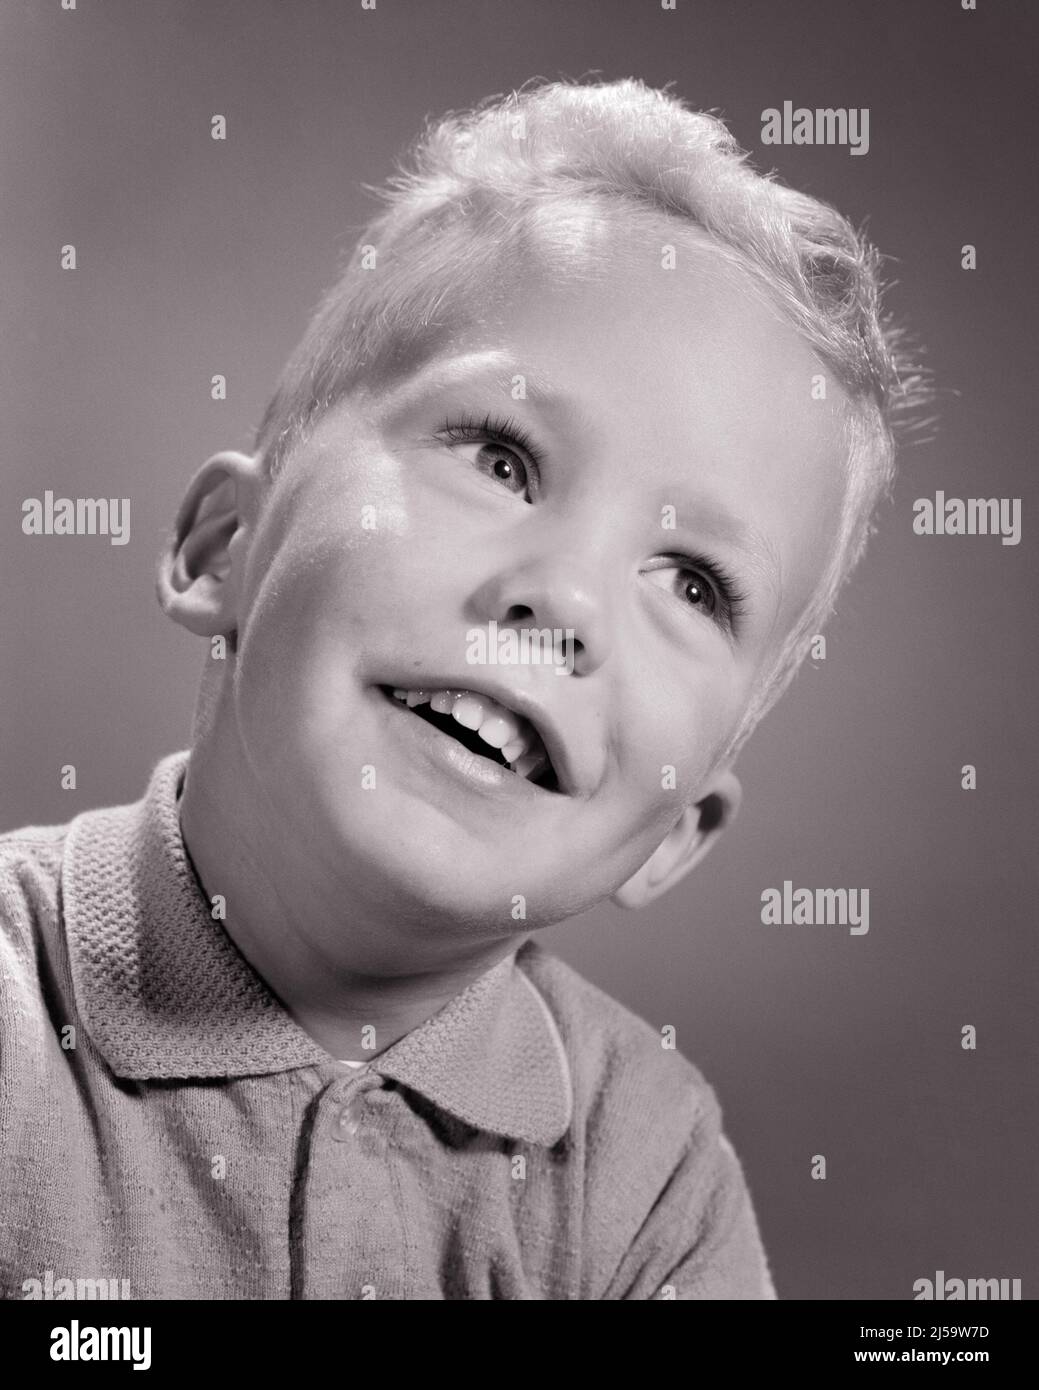 1960s SWEET PORTRAIT OF HAPPY ALERT BLONDE BOY LOOKING UP SMILING HEAD TILTED TO ONE SIDE - j11209 HAR001 HARS HOME LIFE PHYSICAL FITNESS INSPIRATION MALES CONFIDENCE EXPRESSIONS B&W HAPPINESS WELLNESS HEAD AND SHOULDERS CHEERFUL STRENGTH VICTORY COURAGE EXCITEMENT KNOWLEDGE LOW ANGLE DIRECTION PRIDE OPPORTUNITY UP SMILES CONNECTION CONCEPTUAL ALERT CURIOUS JOYFUL STYLISH TILTED PLEASANT AGREEABLE CHARMING CREATIVITY GROWTH JUVENILES LOVABLE PLEASING QUESTIONING ADORABLE APPEALING BLACK AND WHITE CAUCASIAN ETHNICITY HAR001 OLD FASHIONED Stock Photo